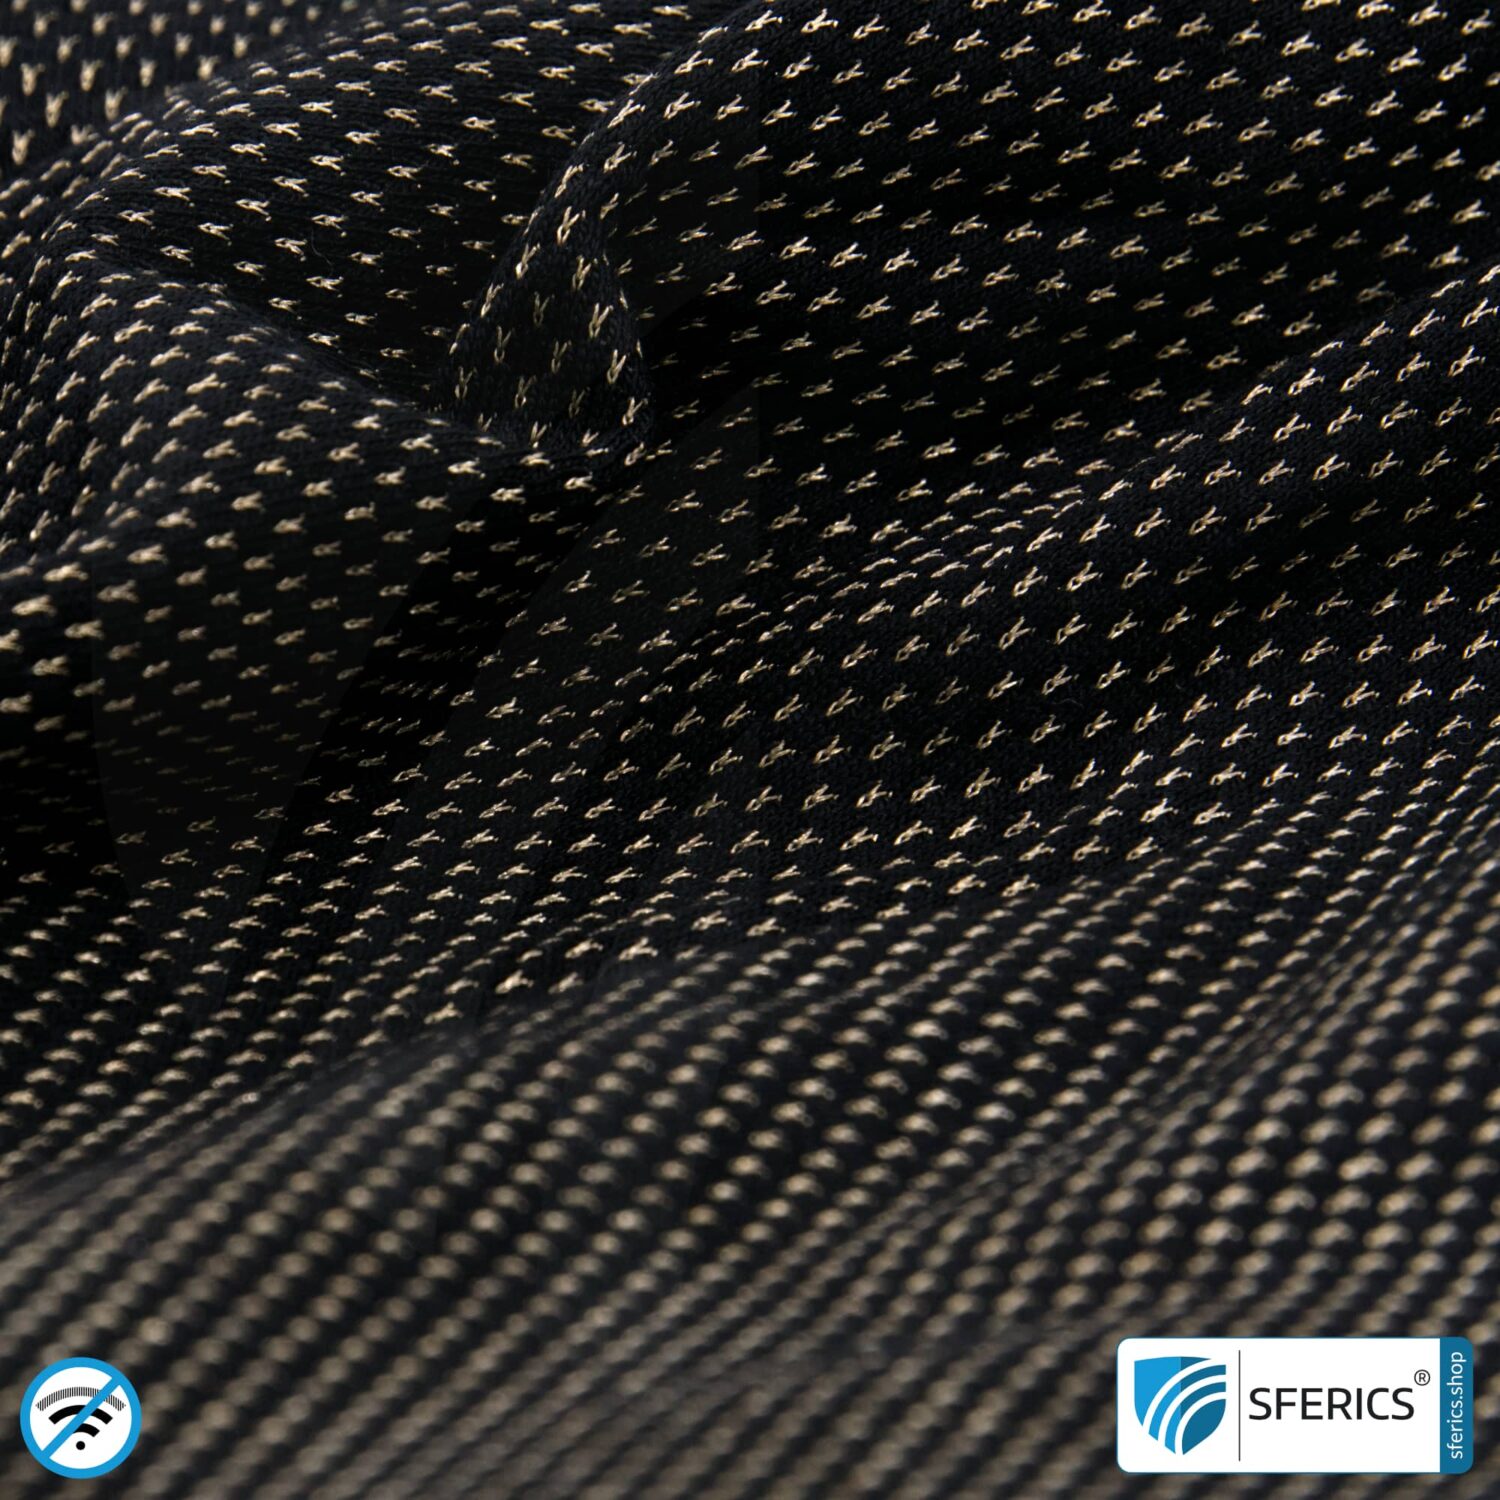 NEW ANTIWAVE shielding fabric | ideal for production of shielding clothing and underwear | black | RF screening attenuation against electrosmog up to 33 dB | 5G ready!